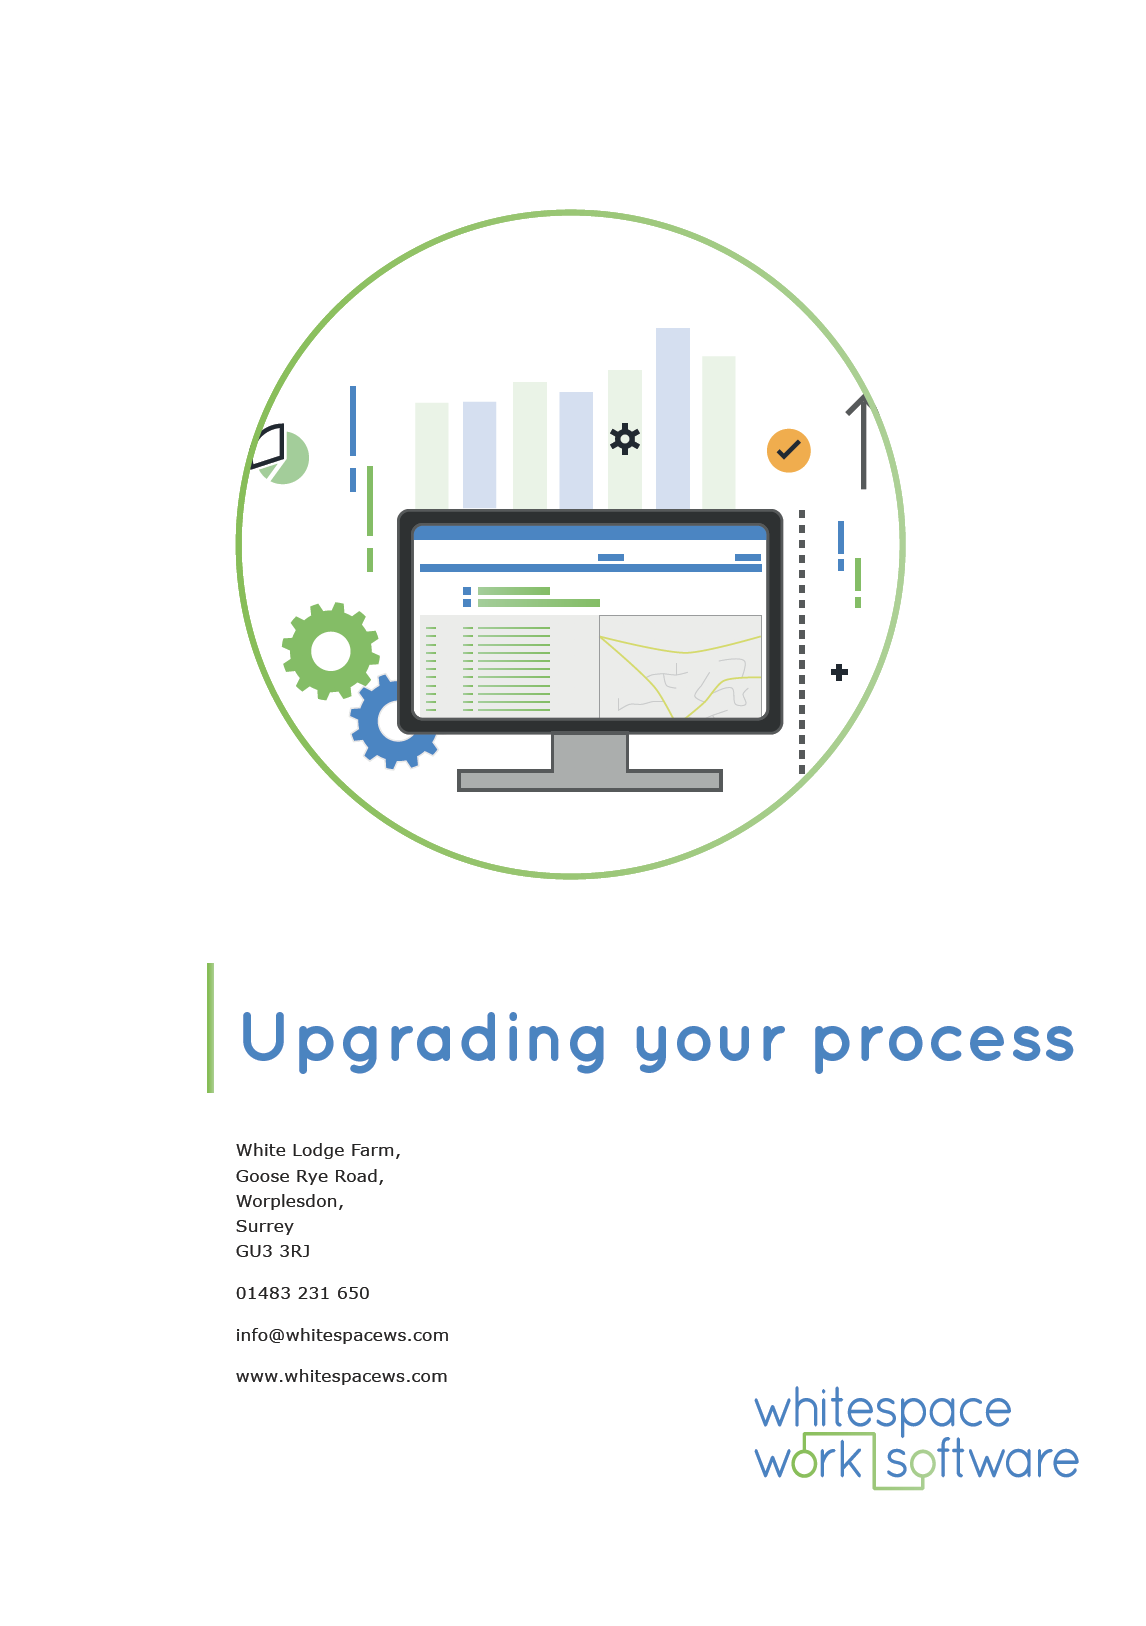 Upgrading your process